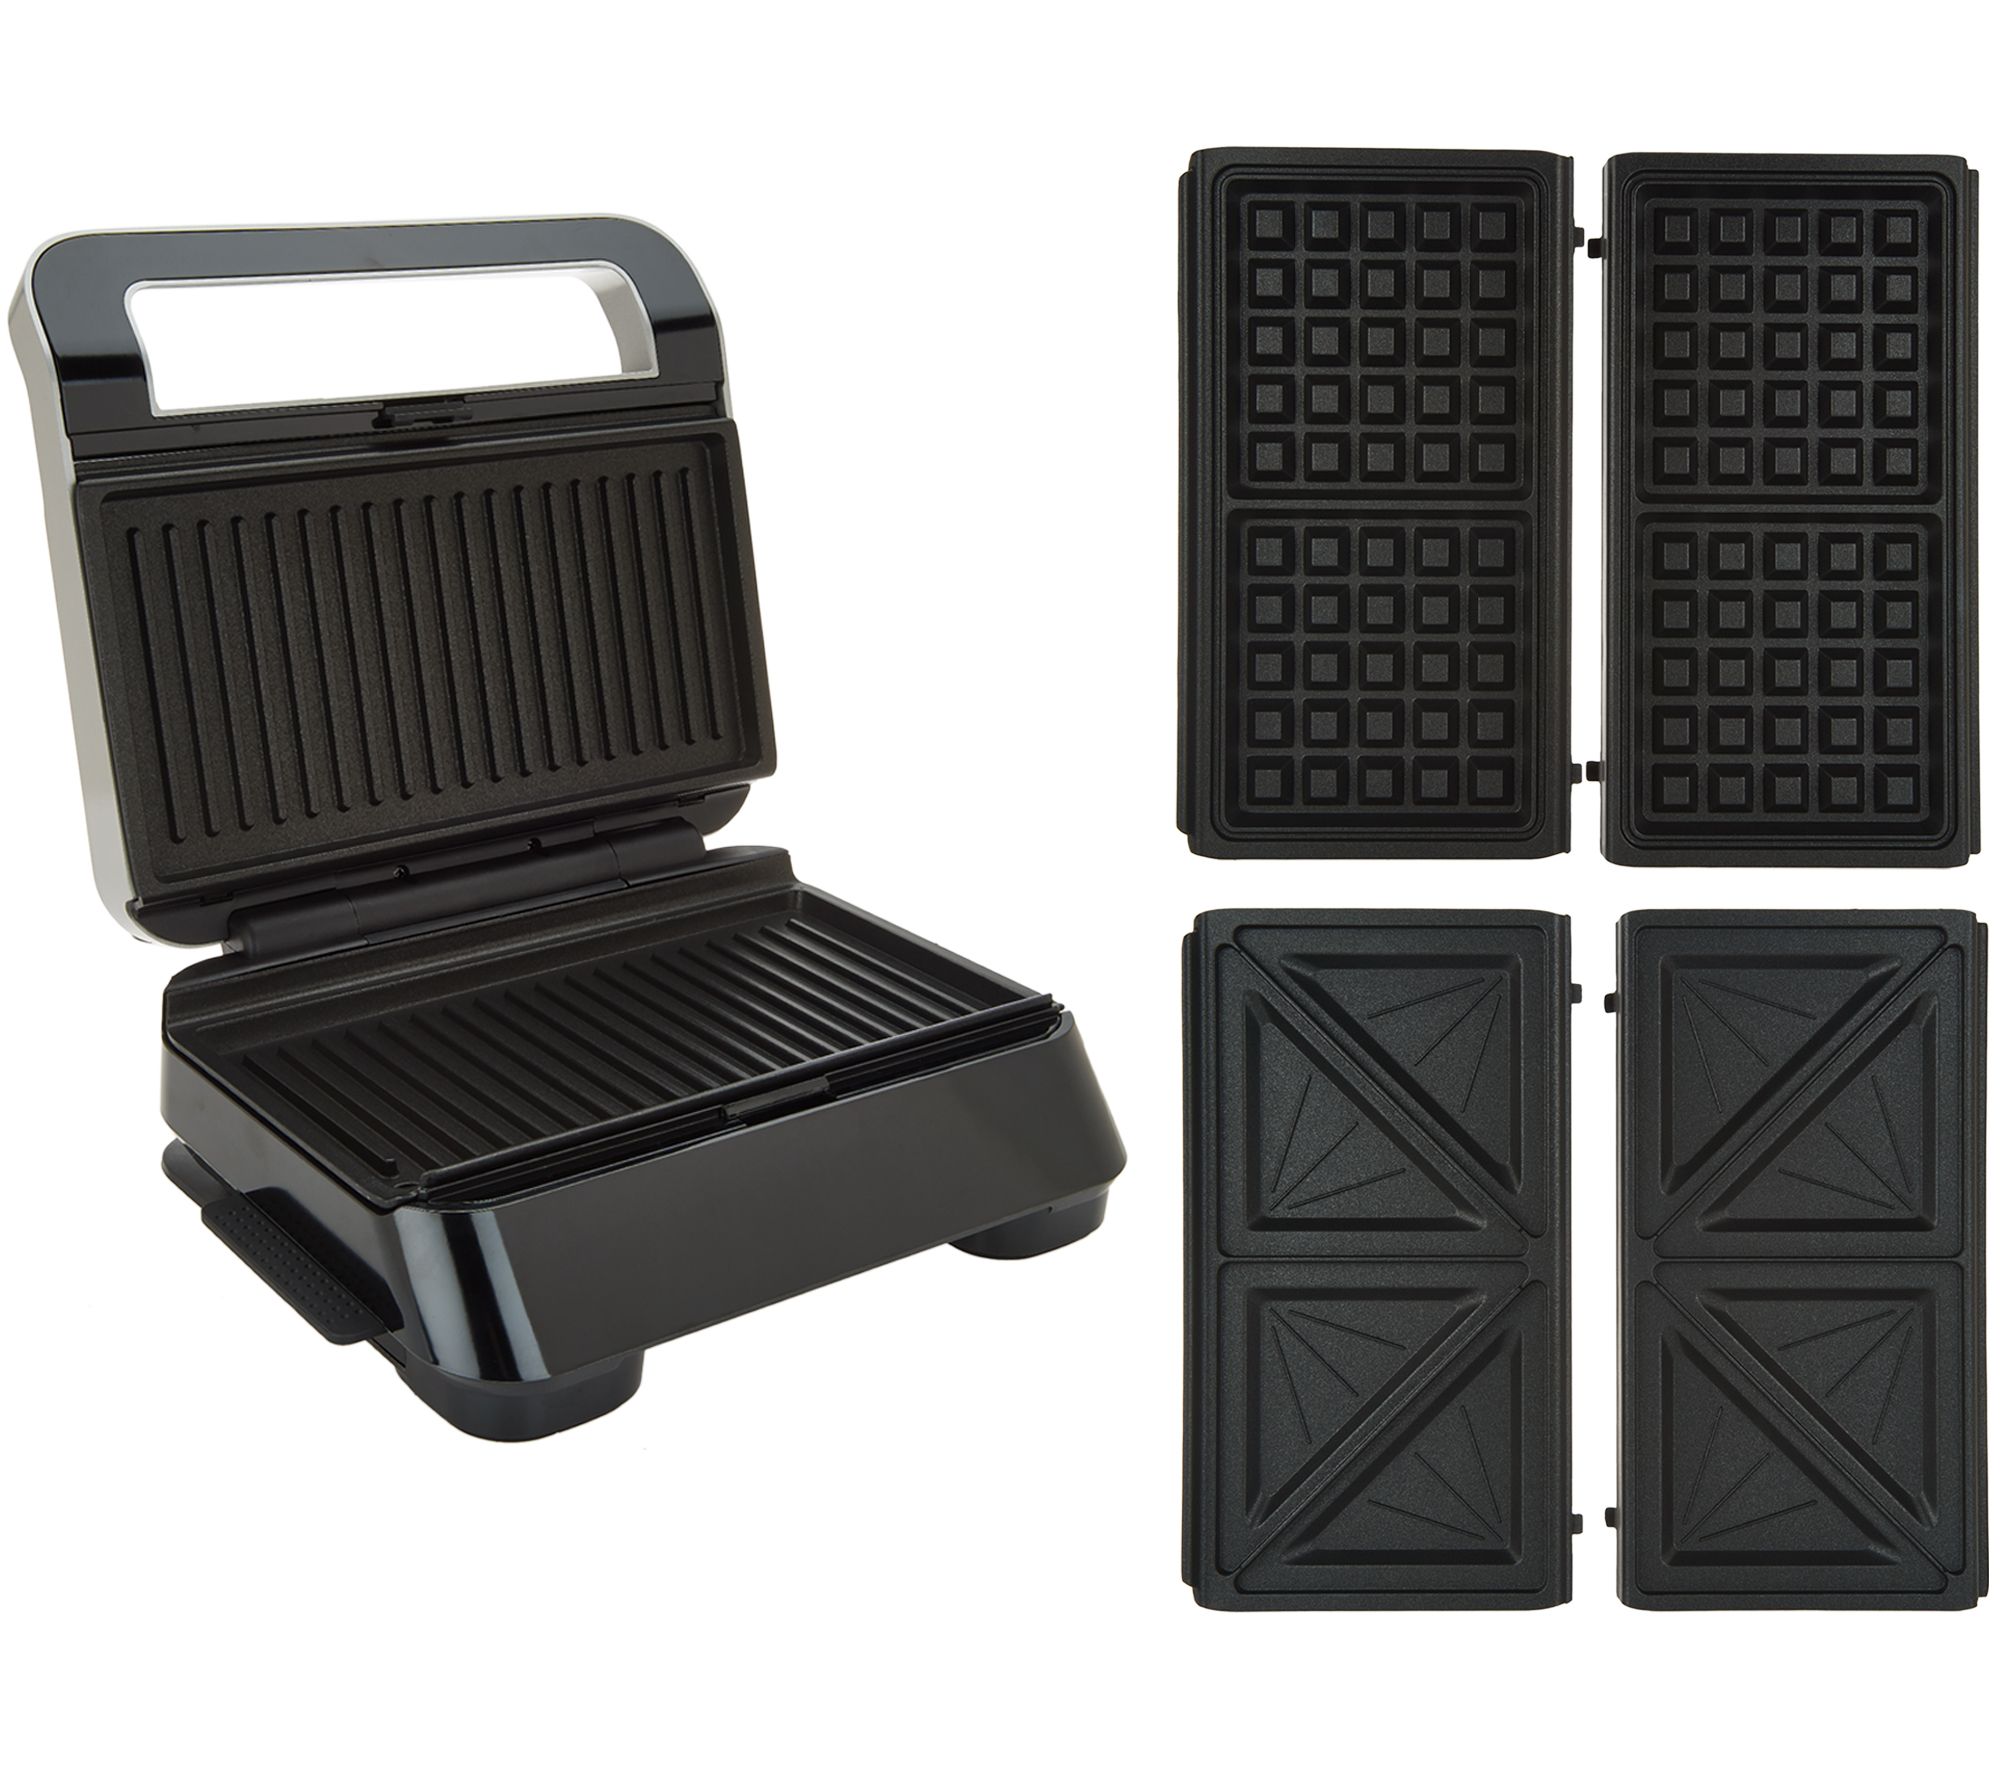 DeLonghi 2-in-1 Indoor Grill & Griddle with Reversible Plate